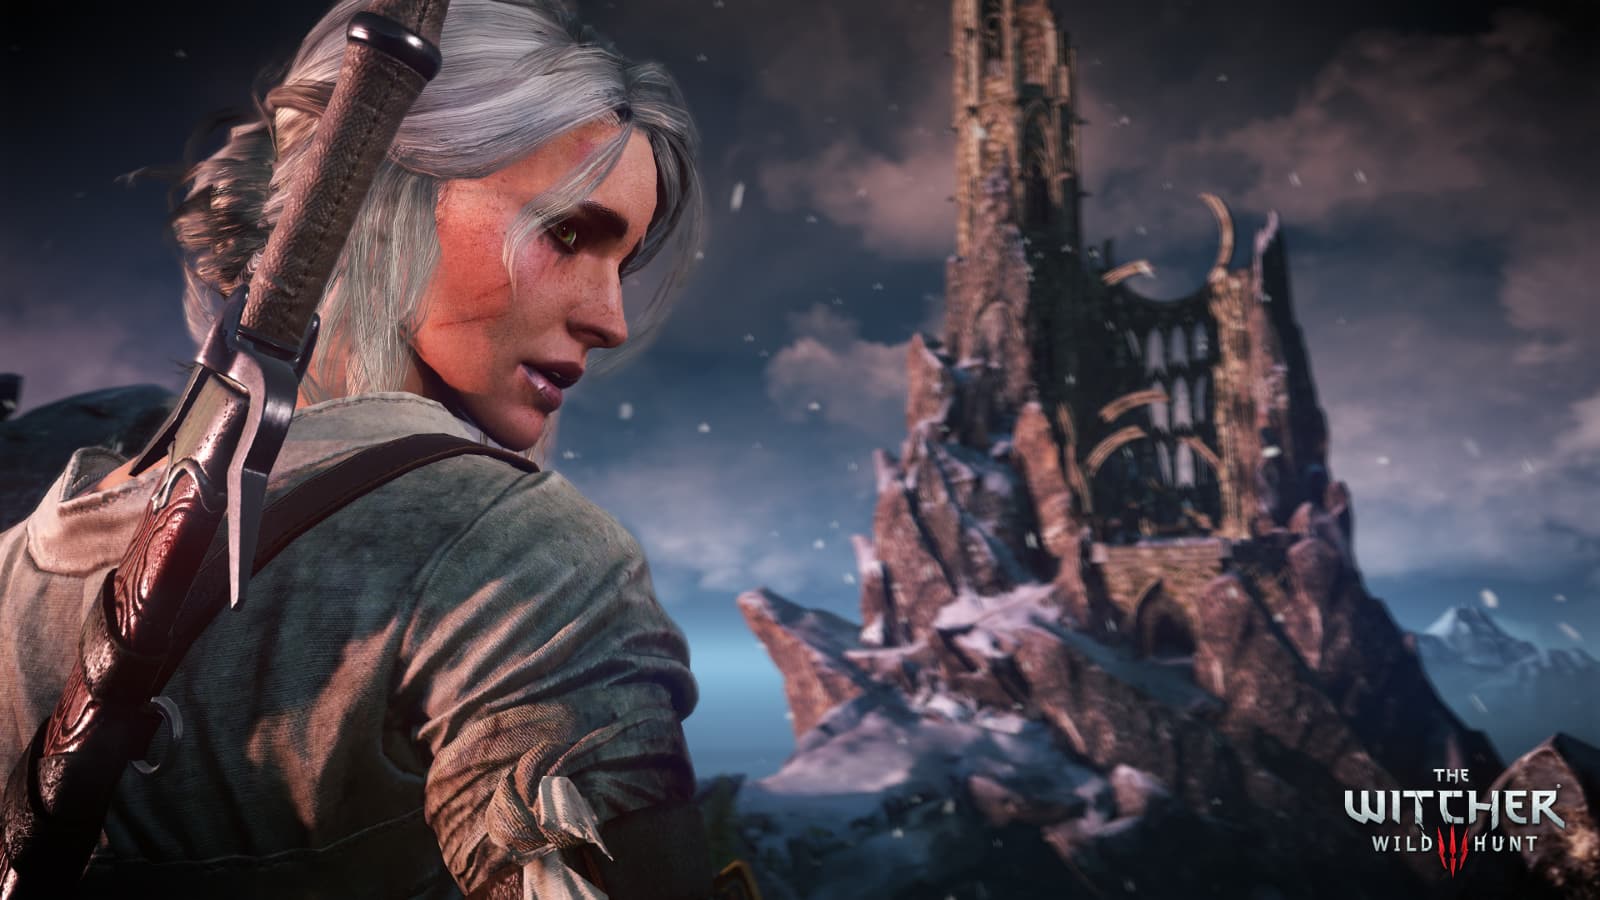 An image of Ciri in The Witcher 3, an open world game like Skyrim.